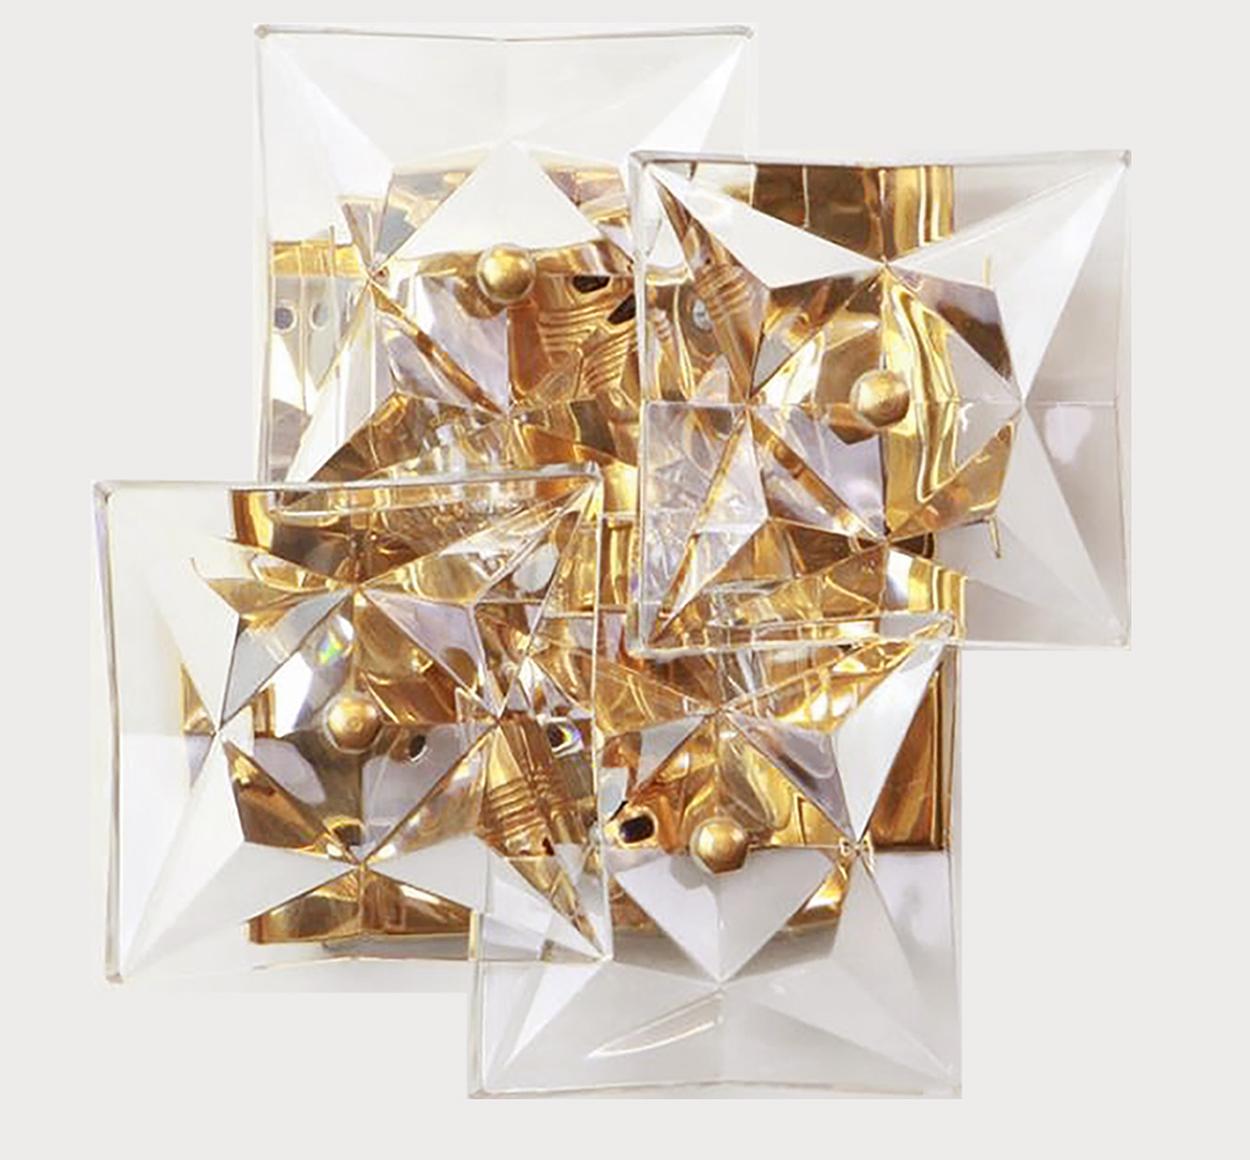 One of the Ten Square Crystal, Gold-Plated, Sconces by Kinkeldey, Germany, 1970s For Sale 1